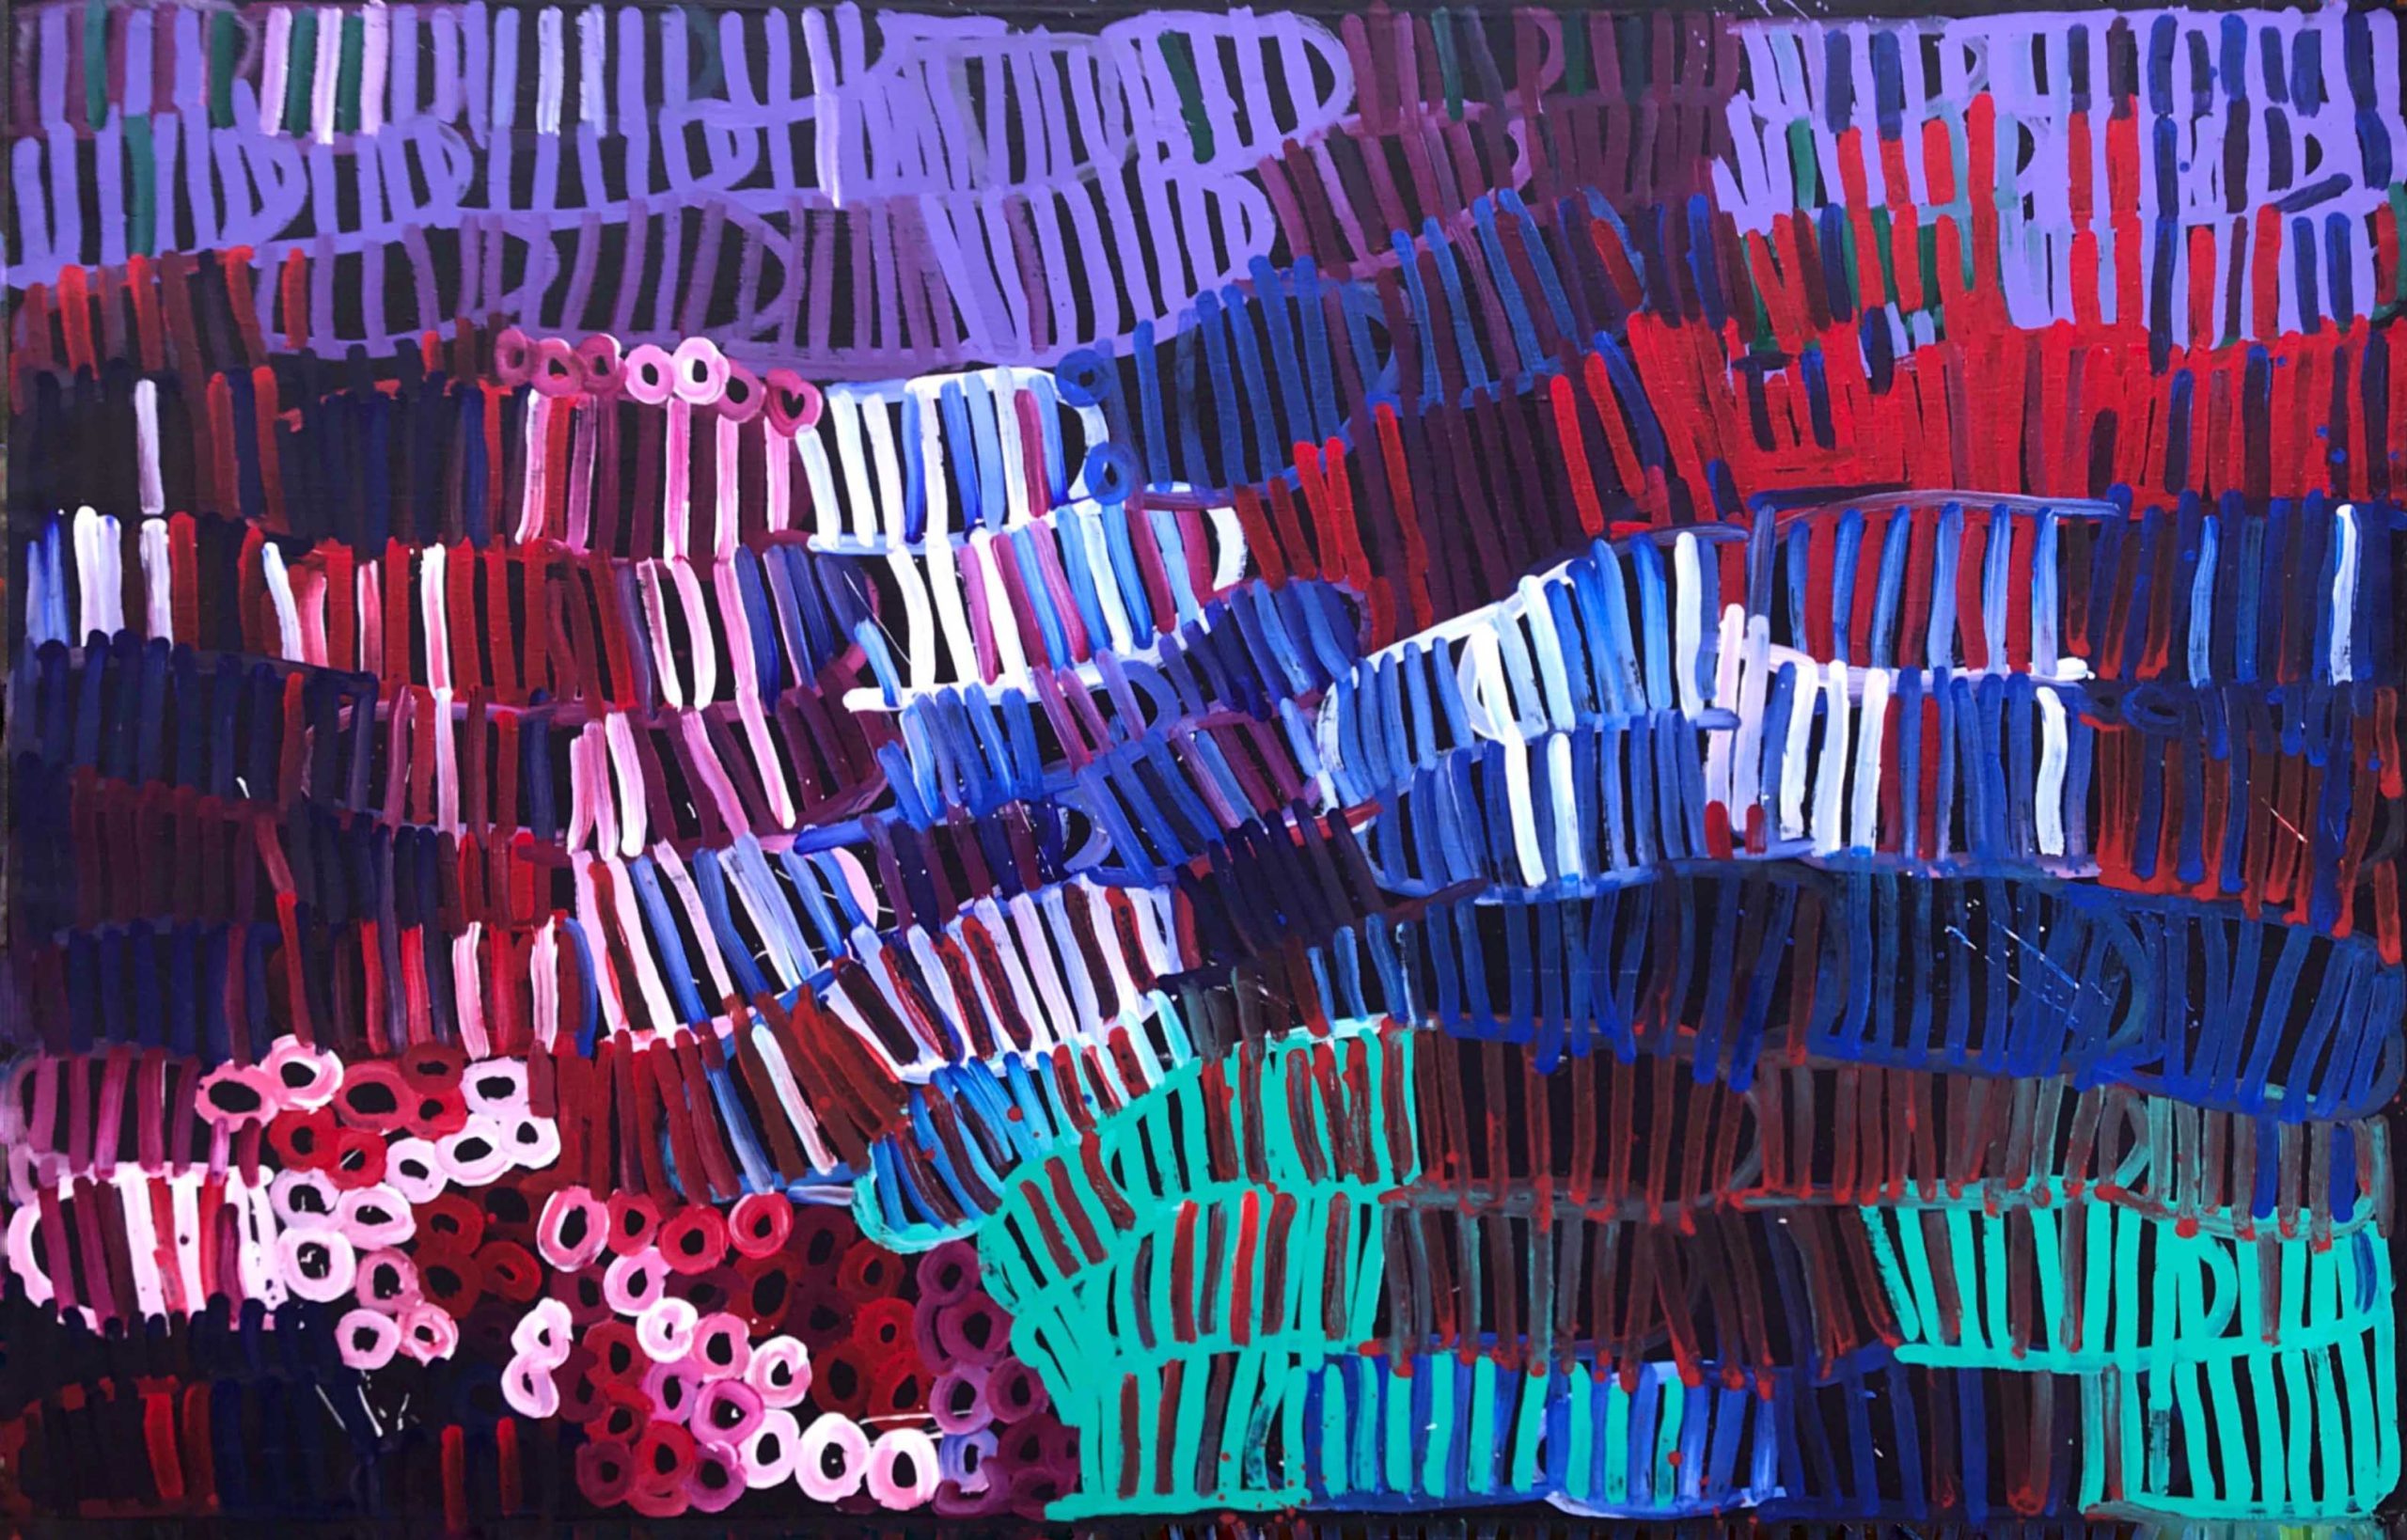 Minnie Pwerle 'Women's Ceremony' (2004) acrylic on linen 130 x 200cm $38,800 | Provenance: Private Collection, Sydney; purchased Mbantua Aboriginal Art Gallery, Alice Springs